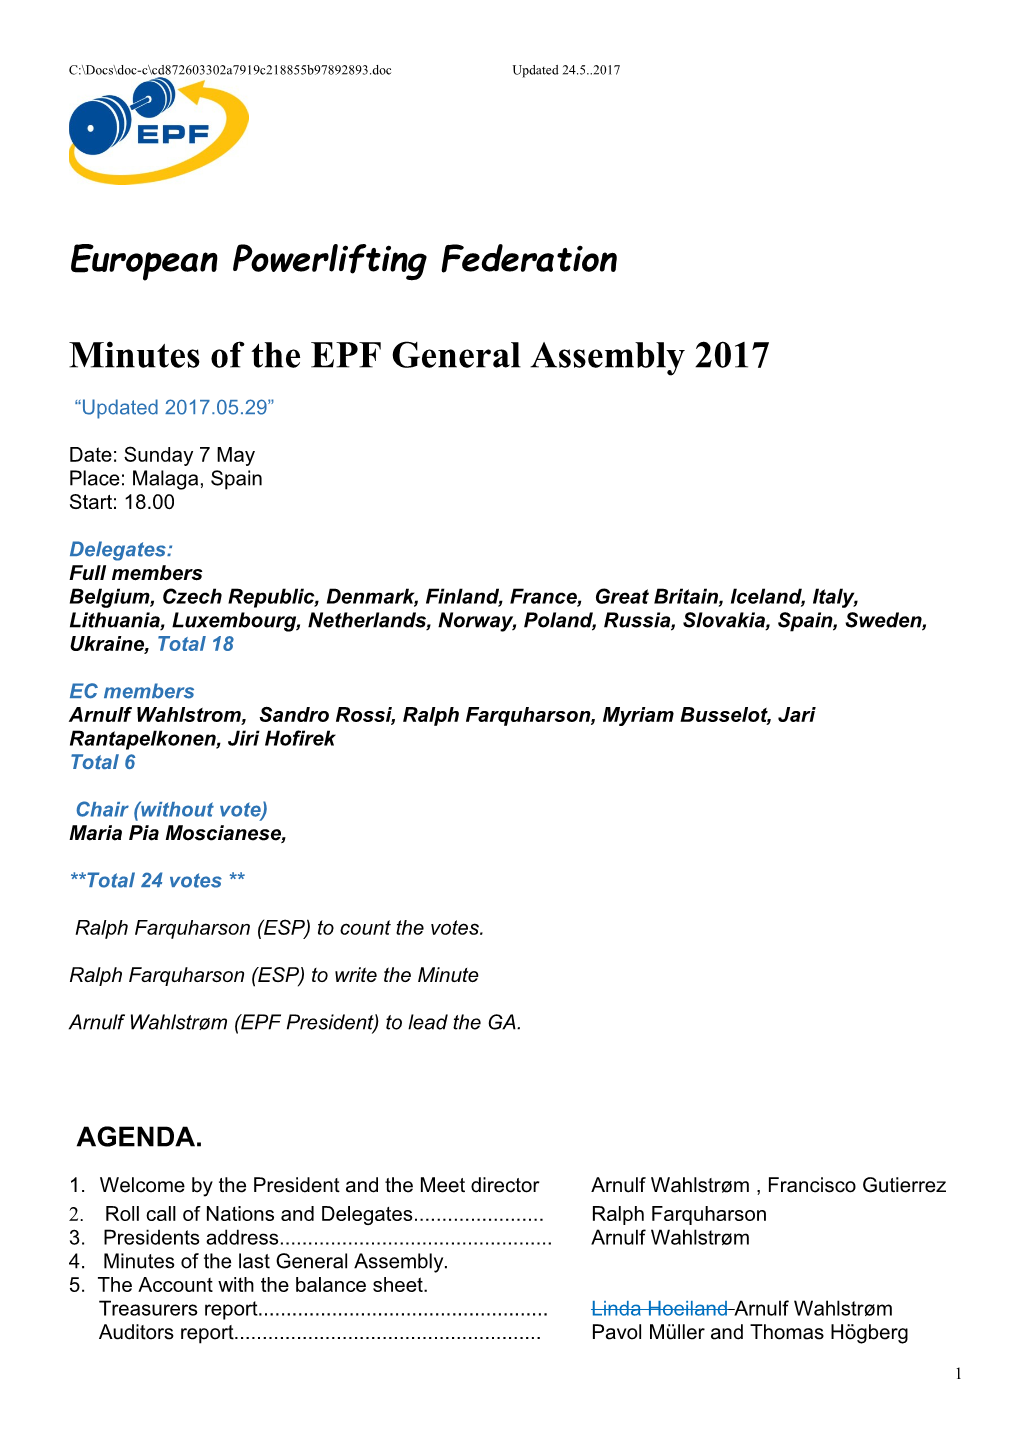 Minutes of the EPF General Assembly 2017